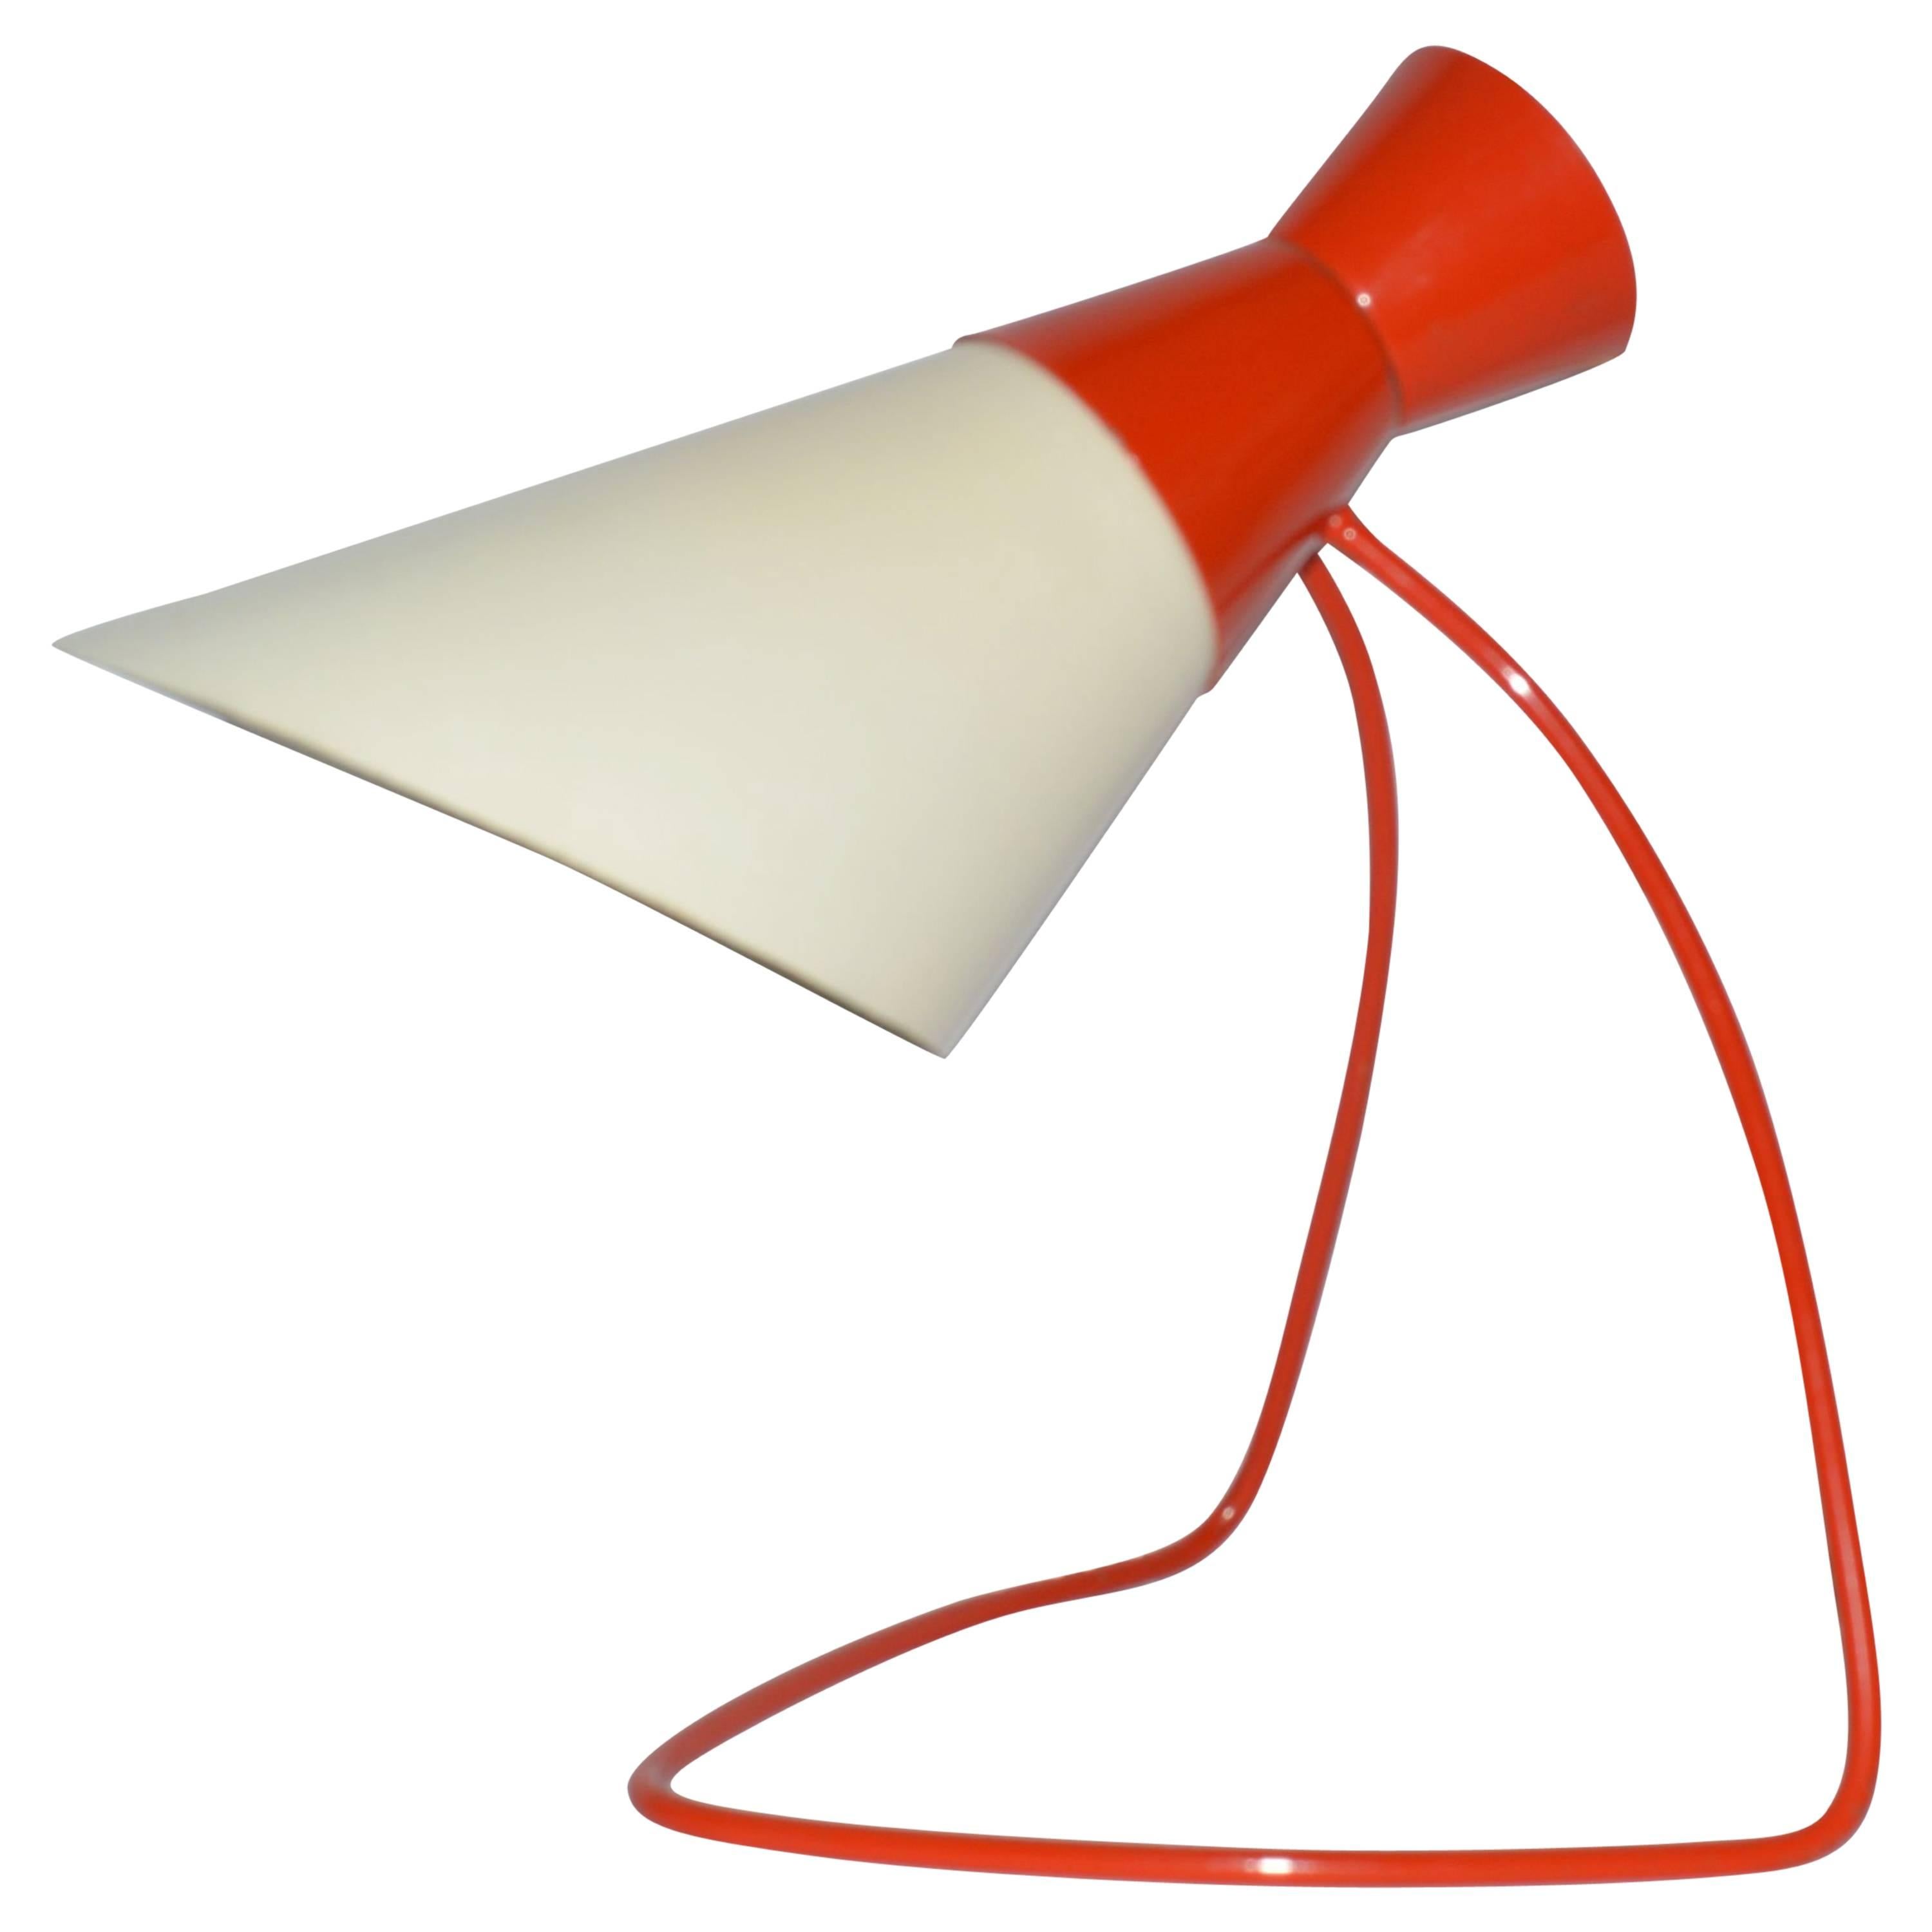 Napako Mid-Century Red and White Table Lamp, Josef Hurka, 1950s For Sale